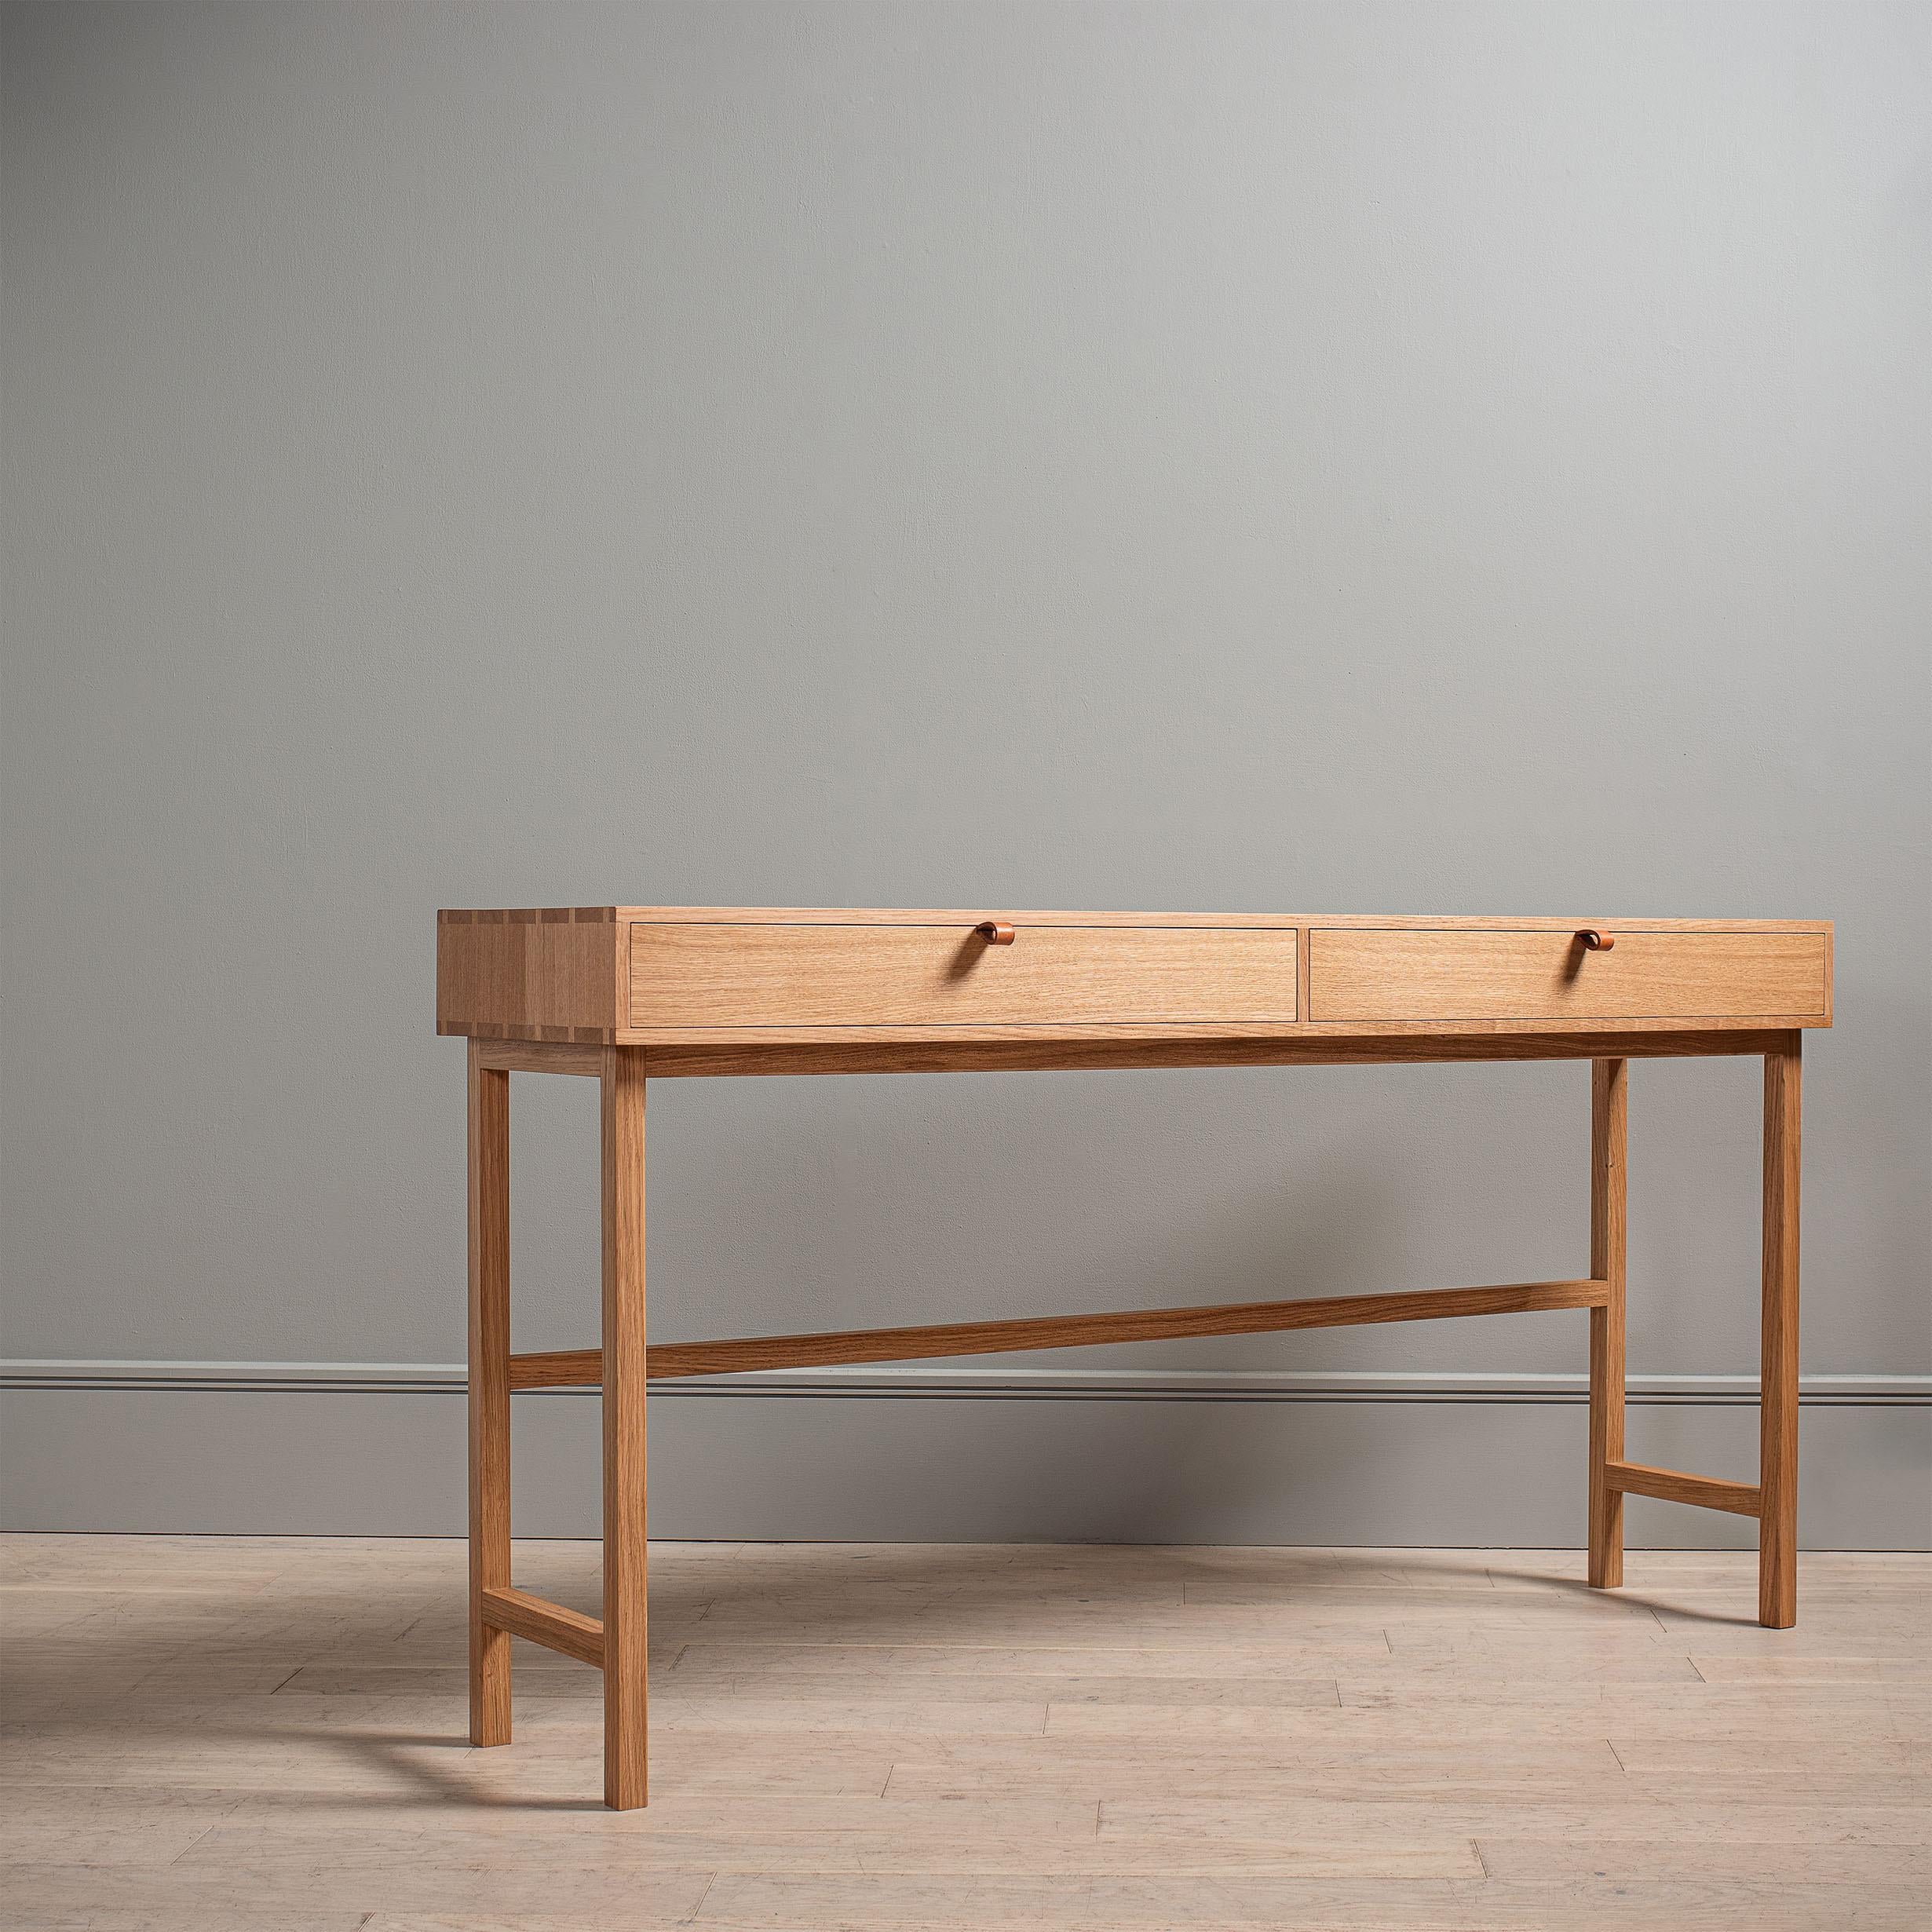 A new large freestanding incarnation of our modernist handcrafted English oak vanity table. Designed and handmade in England using skilled traditional furniture making techniques. Completely handcrafted from the finest fully quarter-sawn English